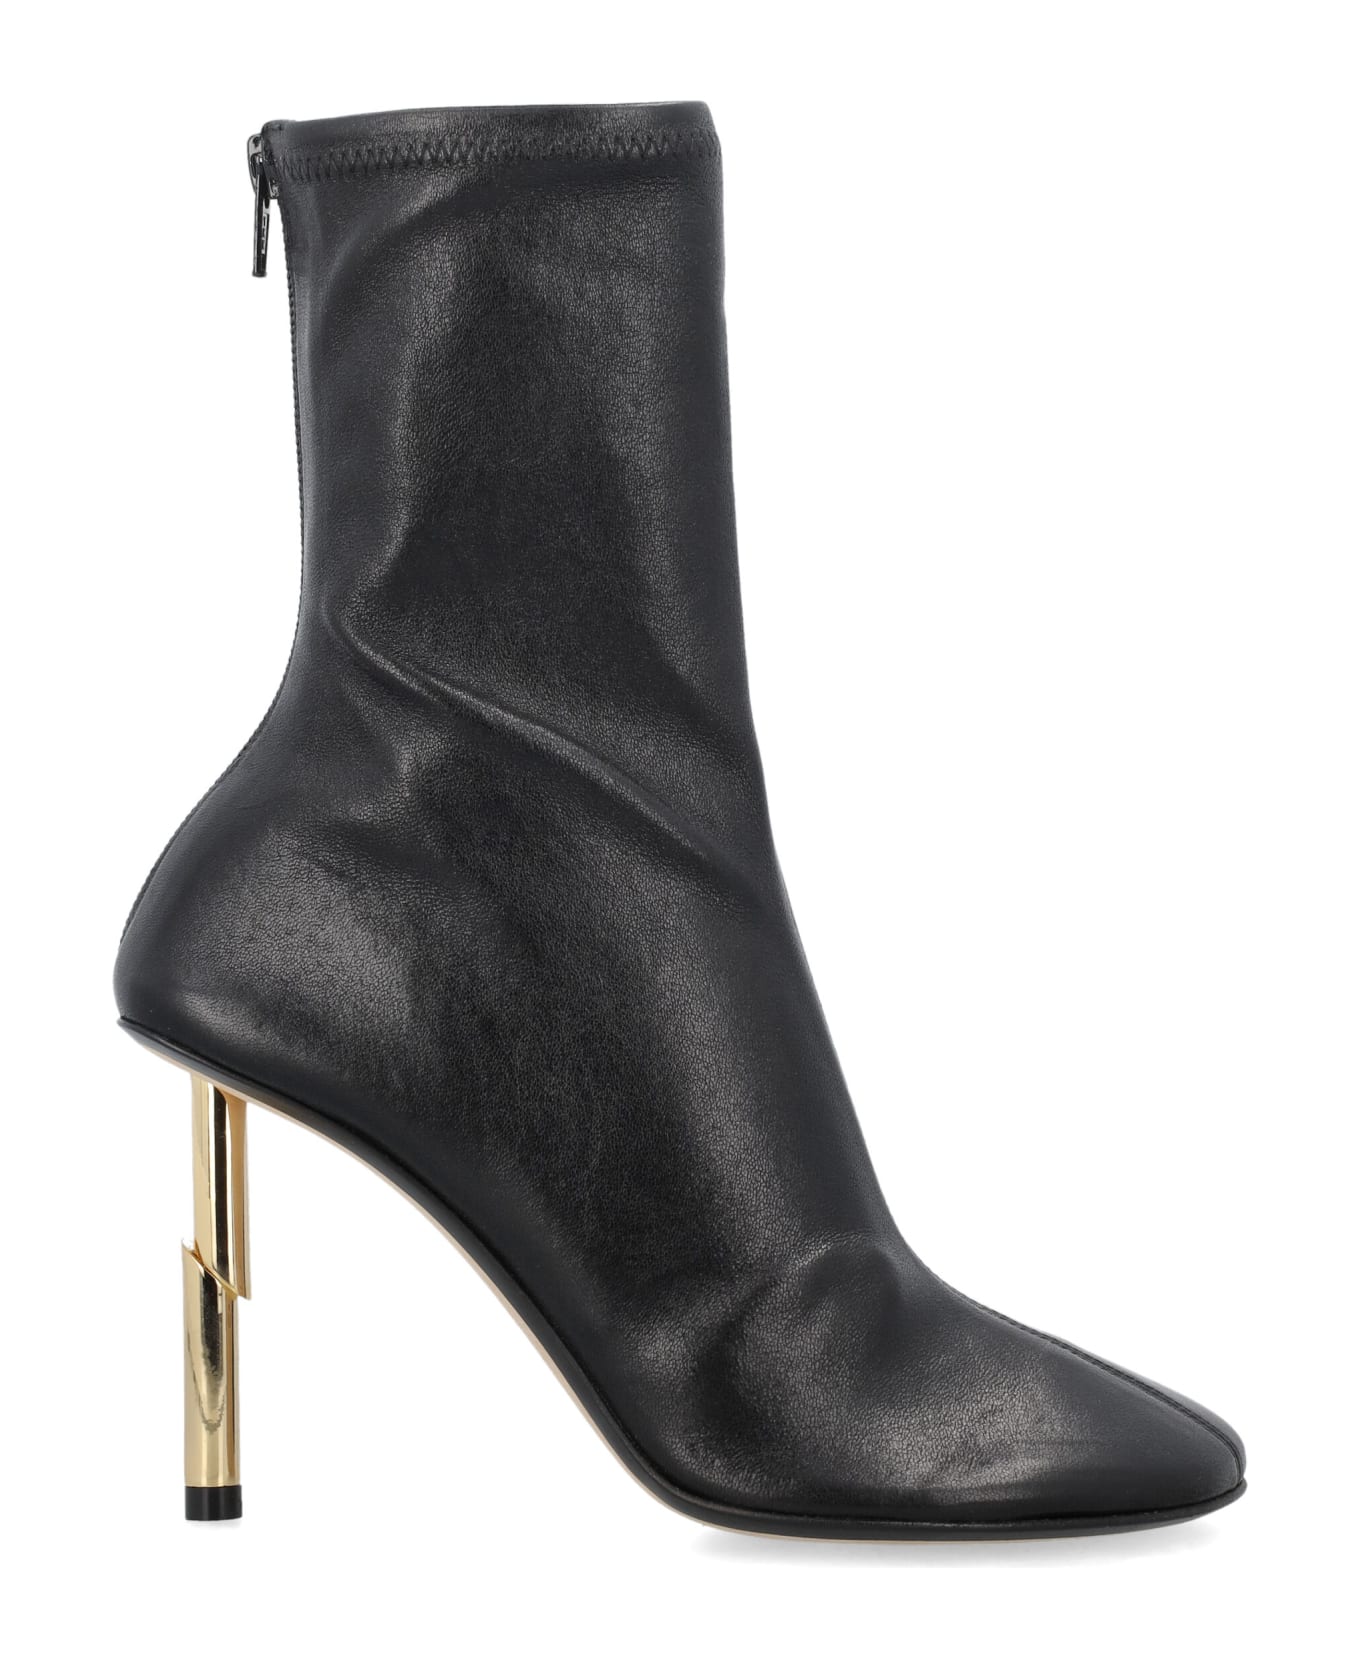 Lanvin Sequence Ankle Boots - BLACK ブーツ